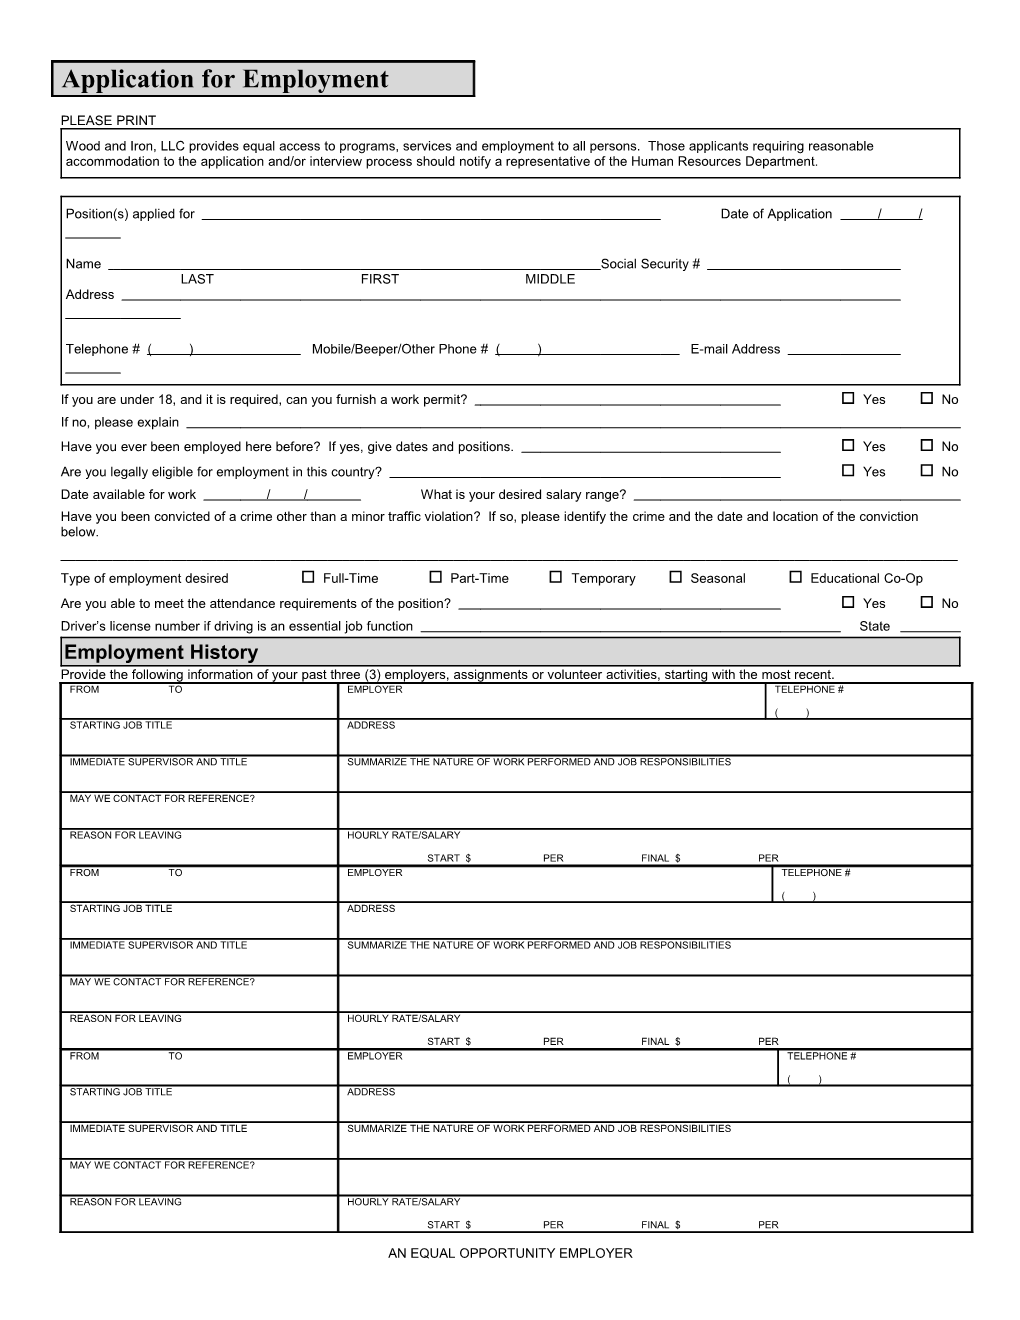 Application for Employment s96